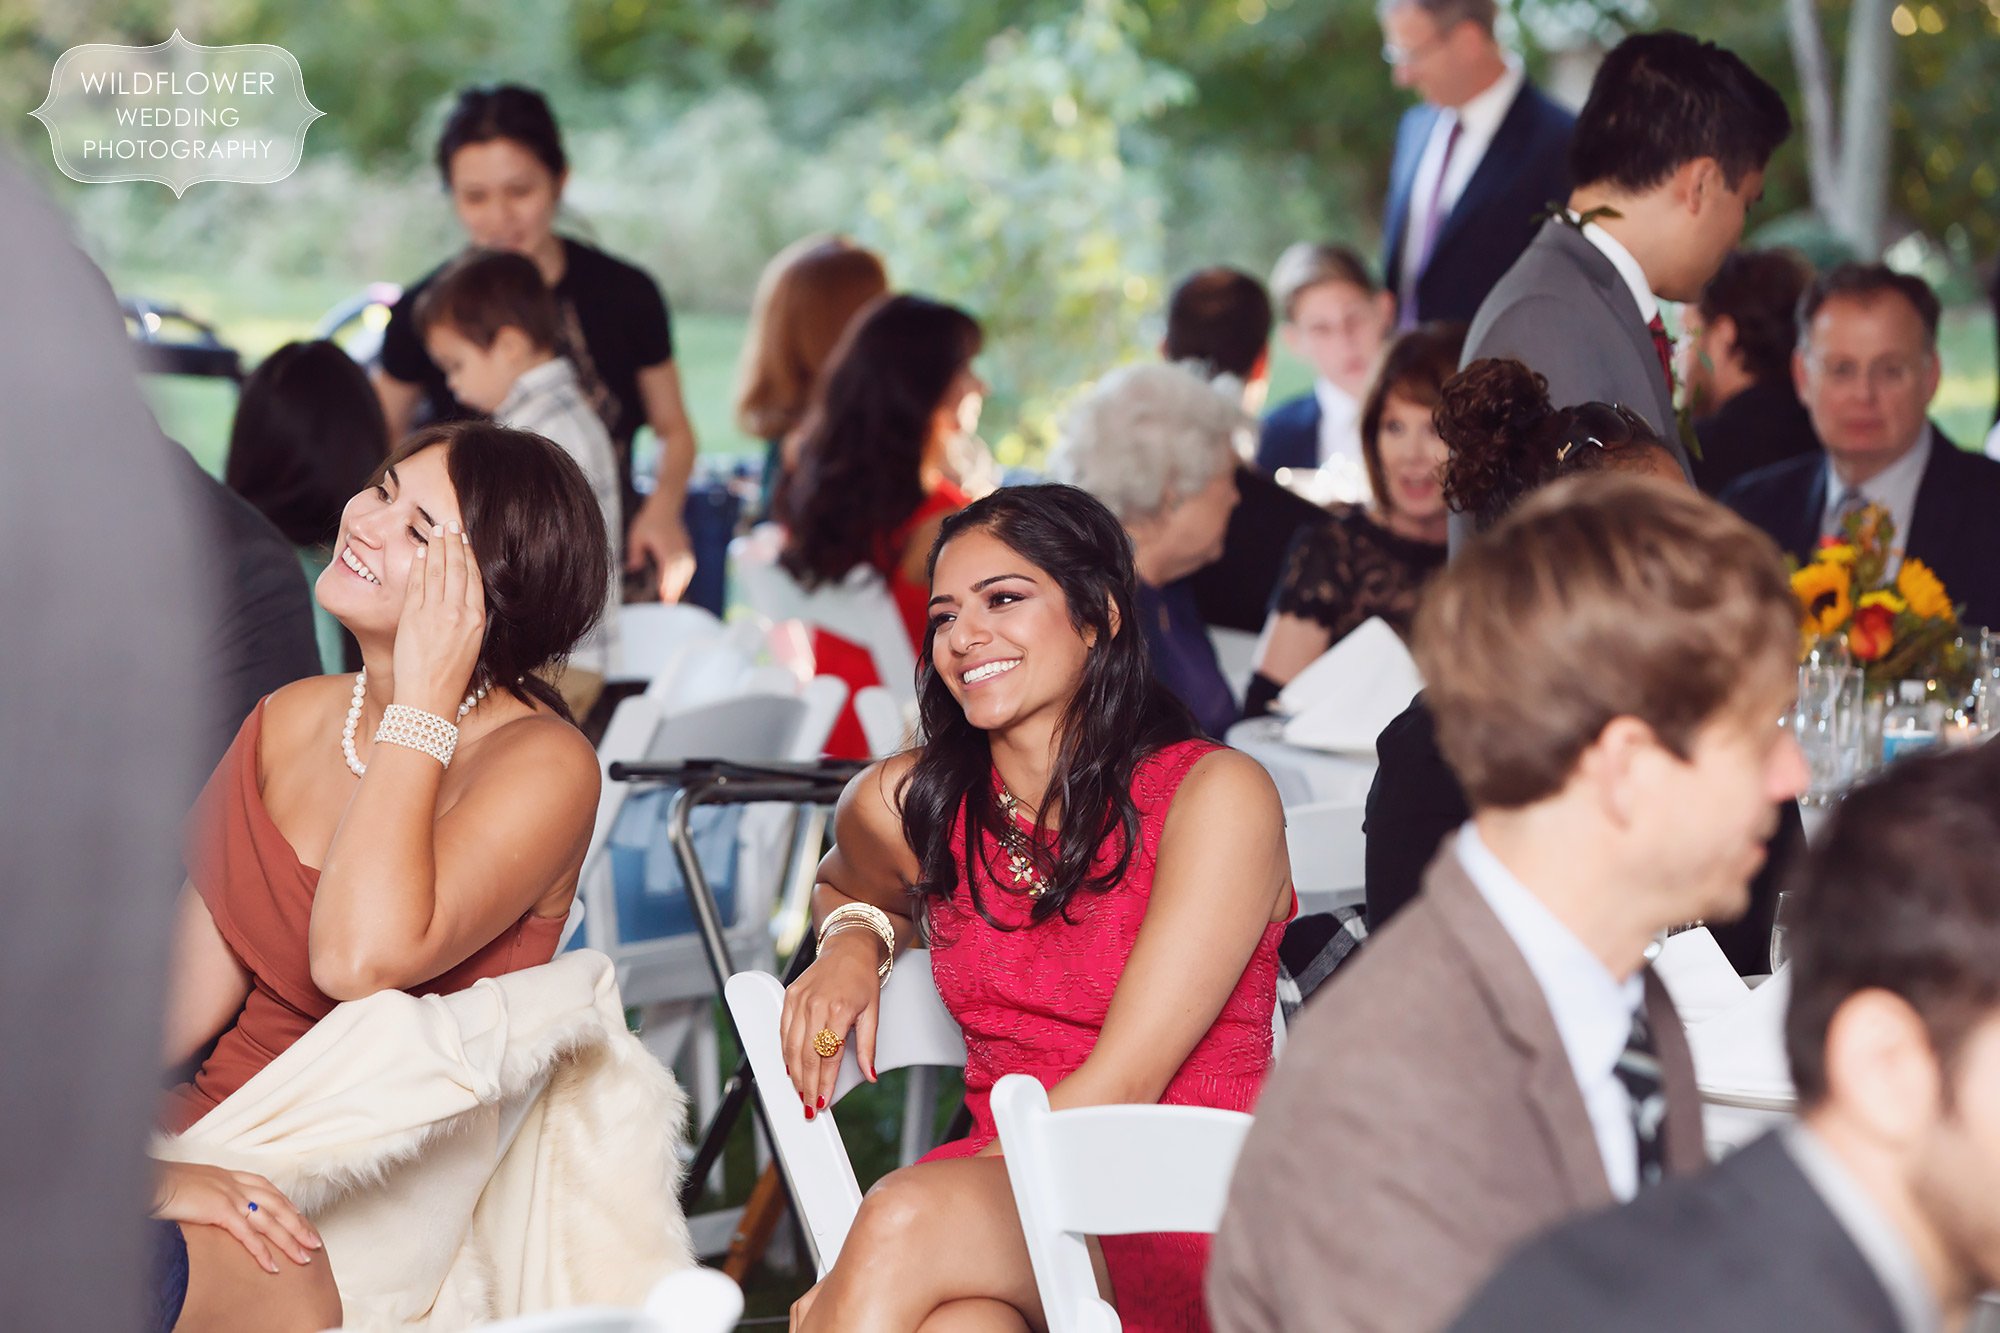 Beautiful photos of wedding guests at this backyard wedding in West County.